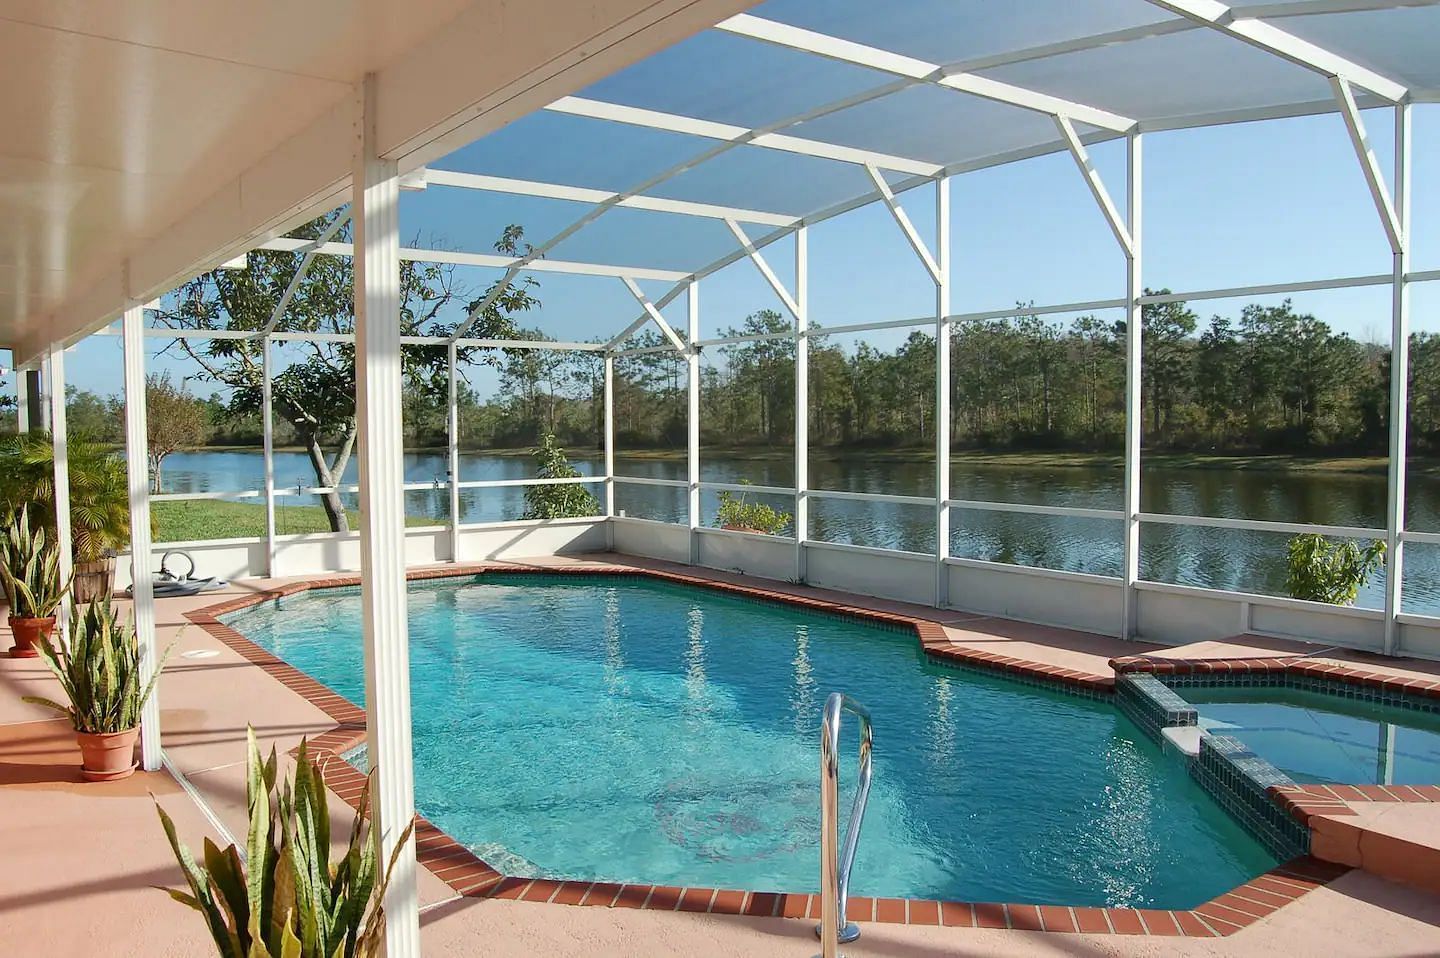 JWguest House at Orlando, Florida | Private Home with Pool, 3 Bd 2 Bath, Close to Disney | Jwbnb no brobnb 5